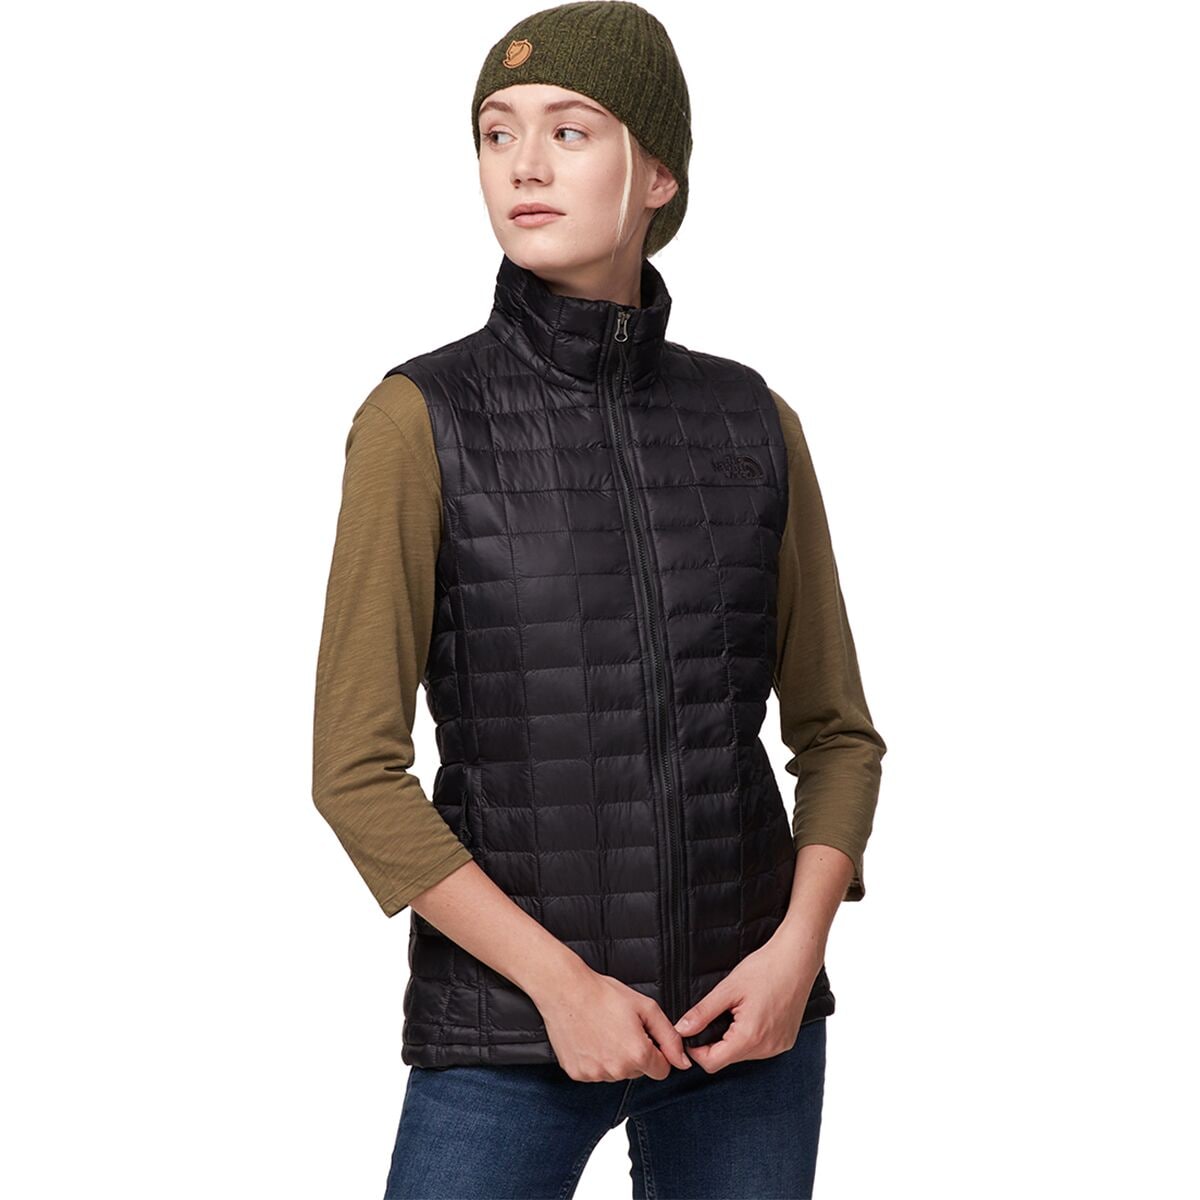 grey north face vest womens